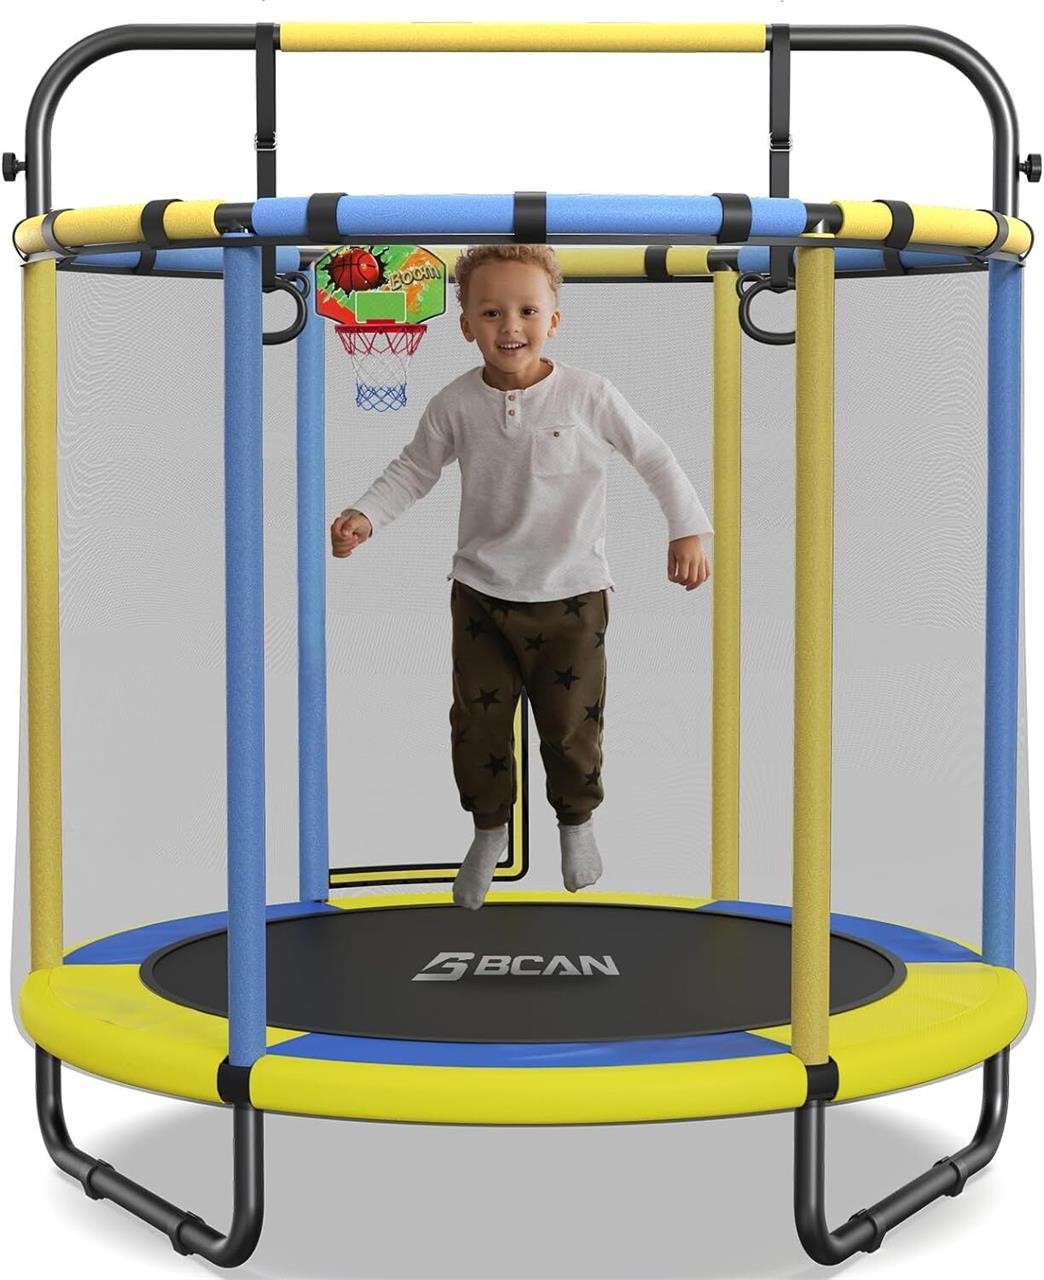 BCAN 60'/48 Mini Trampoline for Ages 1-8 Kid